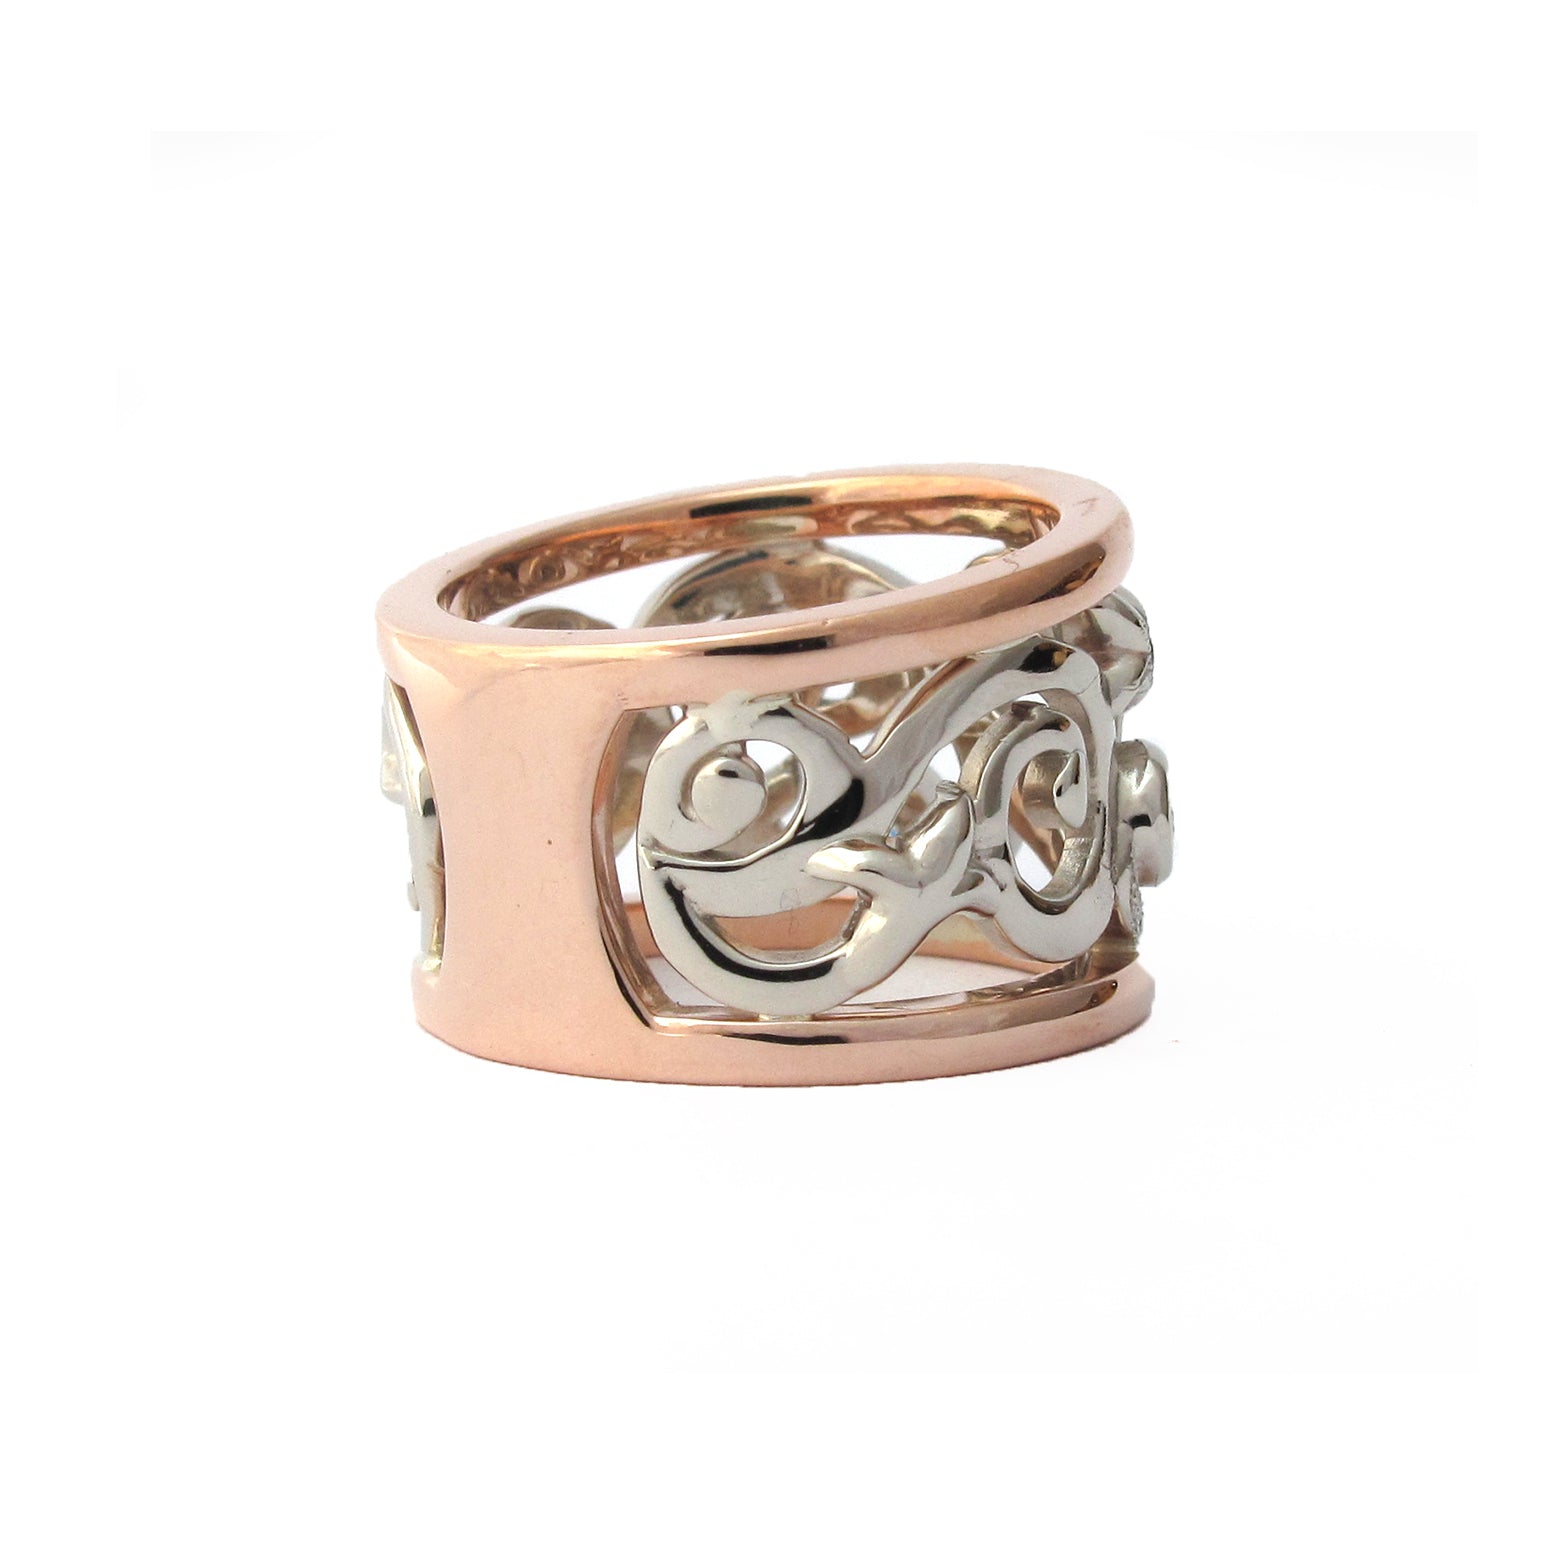 Crafted in 14KT white and rose gold, this ring features a diamond-set vine design with fleur de lys. 